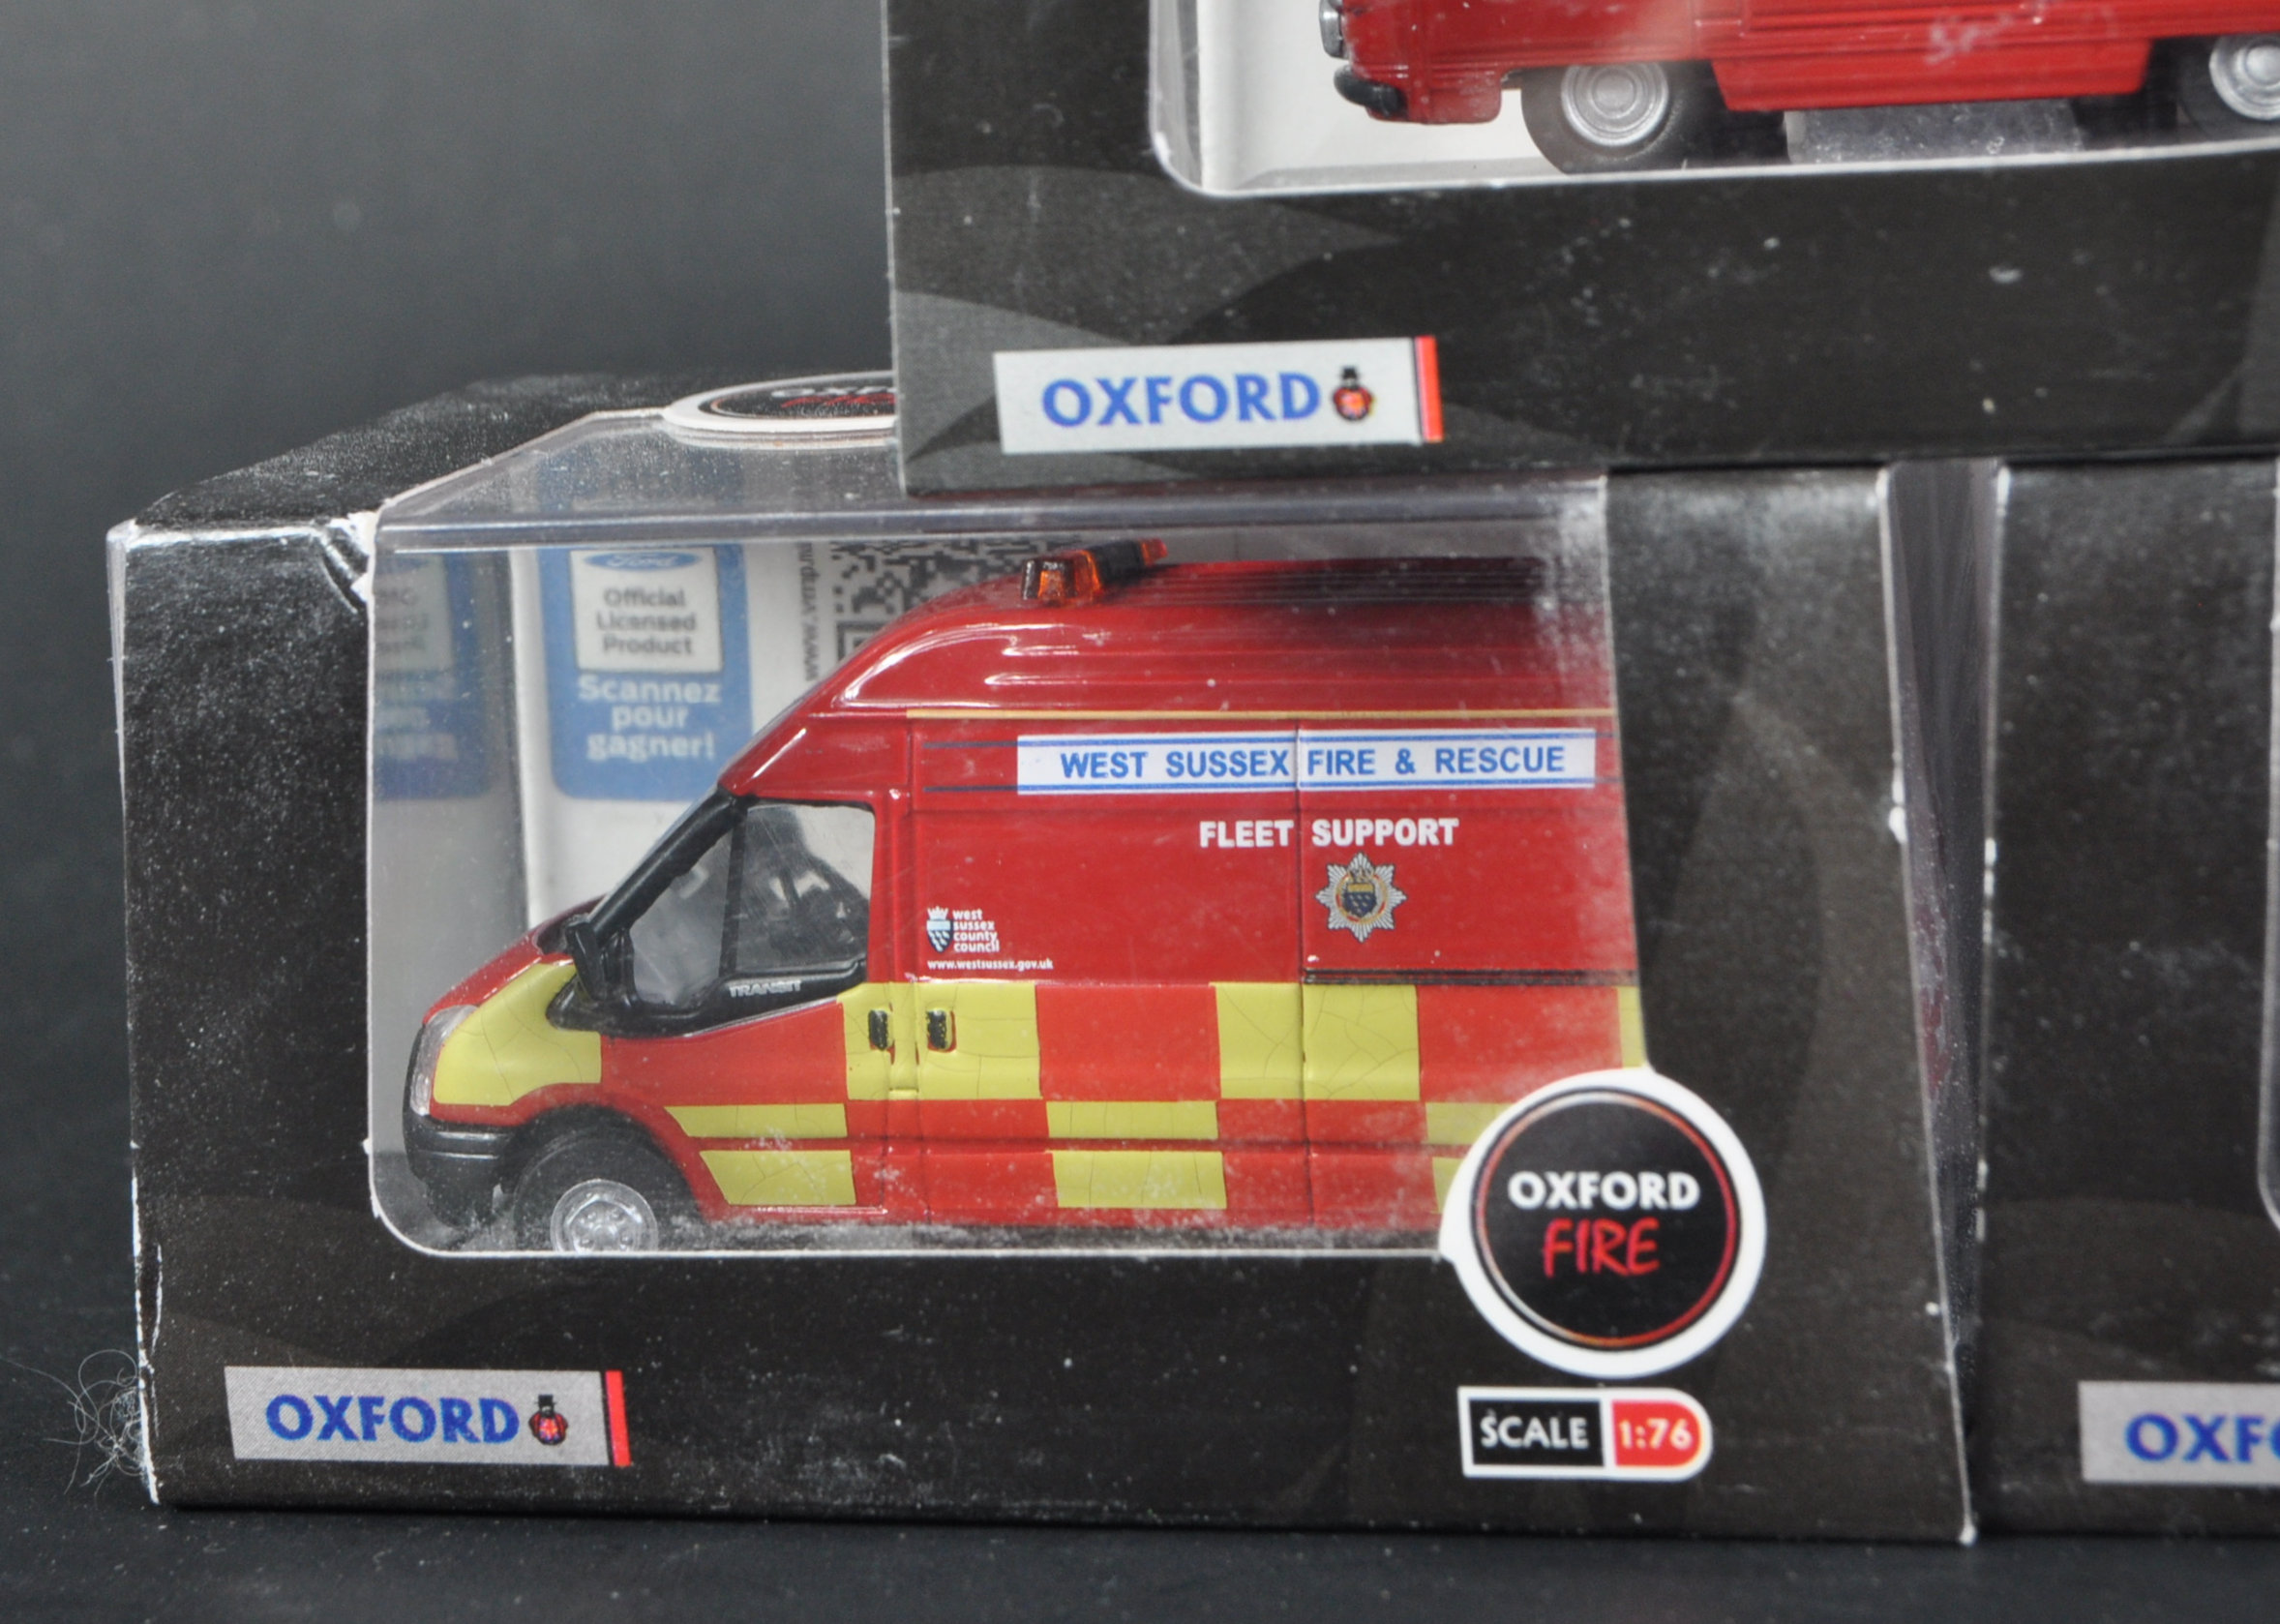 COLLECTION OF ASSORTED 1/76 SCALE DIECAST MODEL FIRE ENGINE TRUCKS - Image 6 of 6